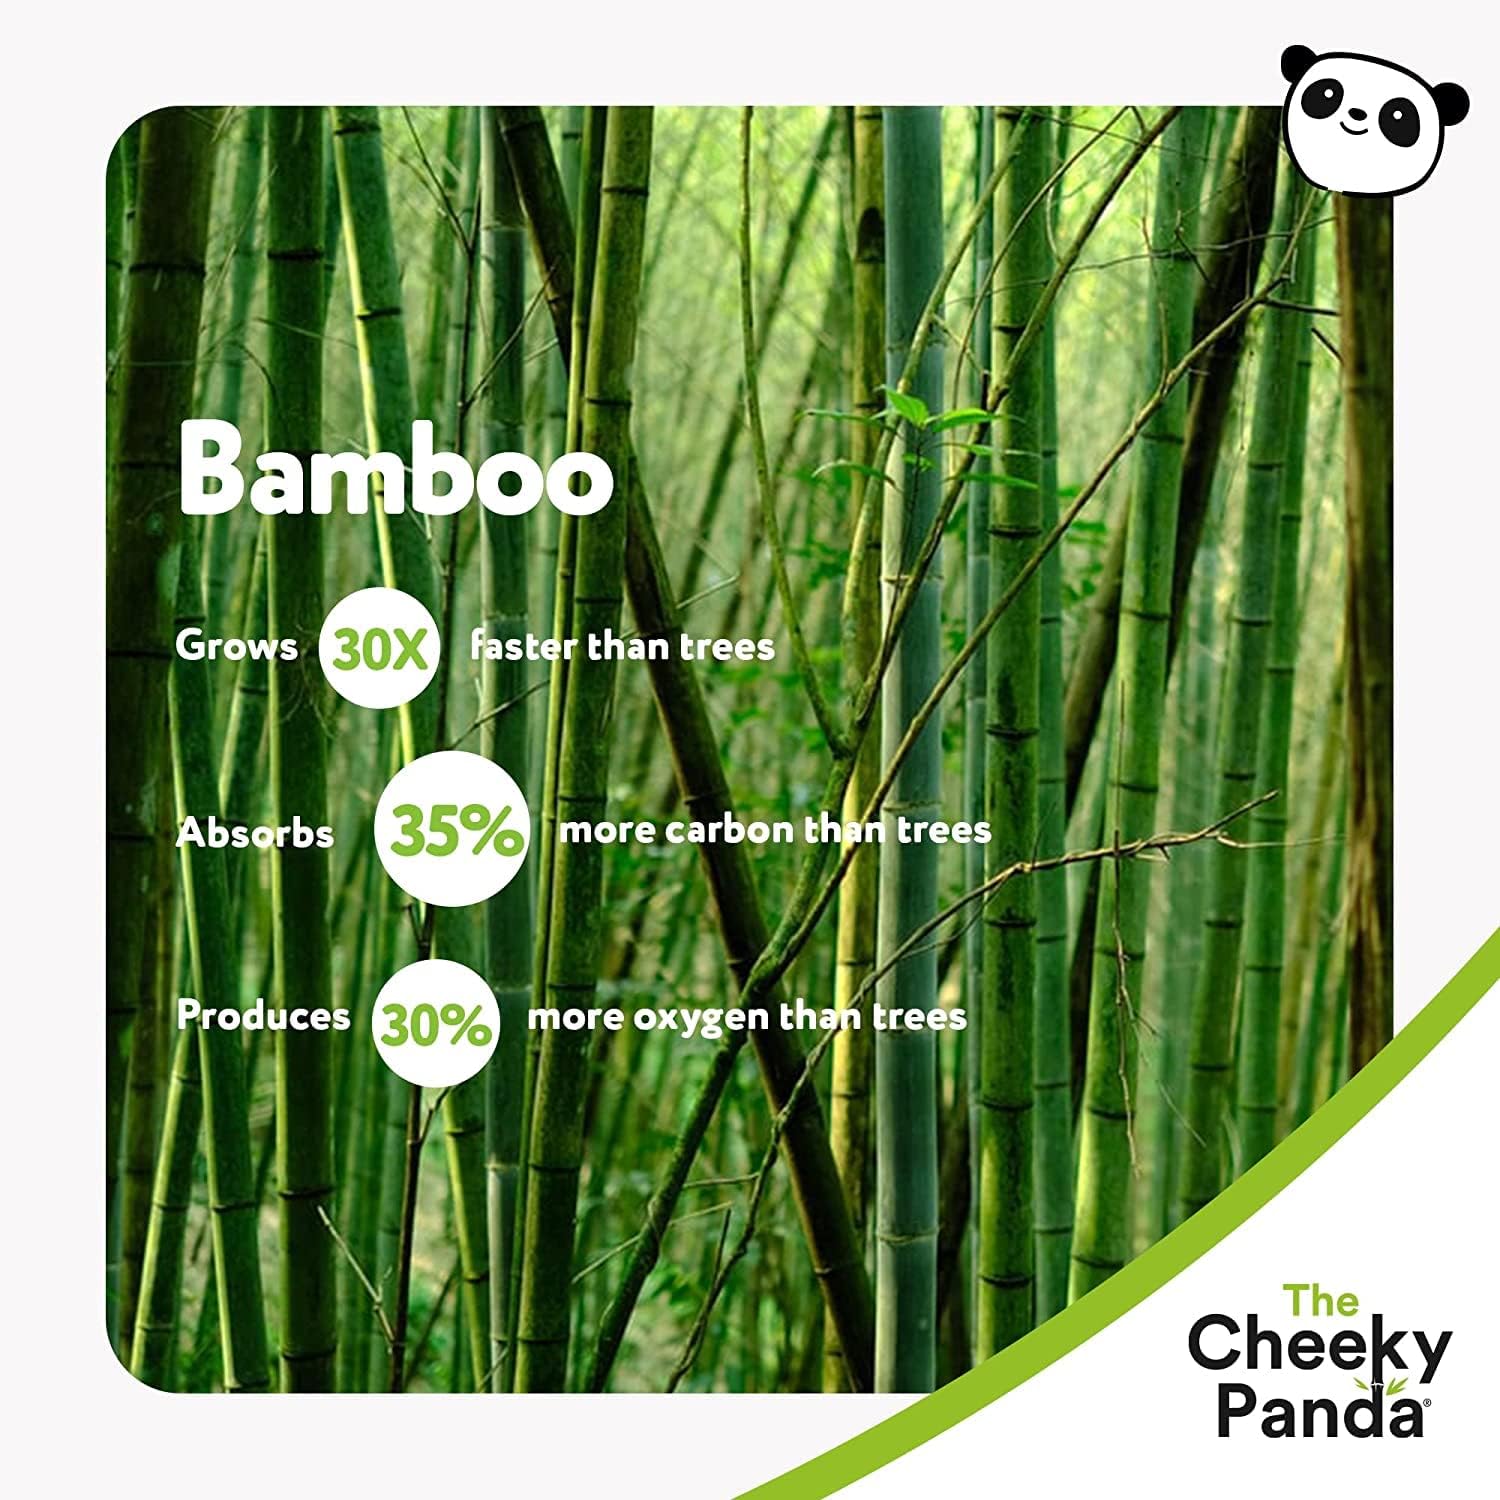 Bamboo Luxury Toilet Tissue 3PLY 200 Sheets 9 Rolls